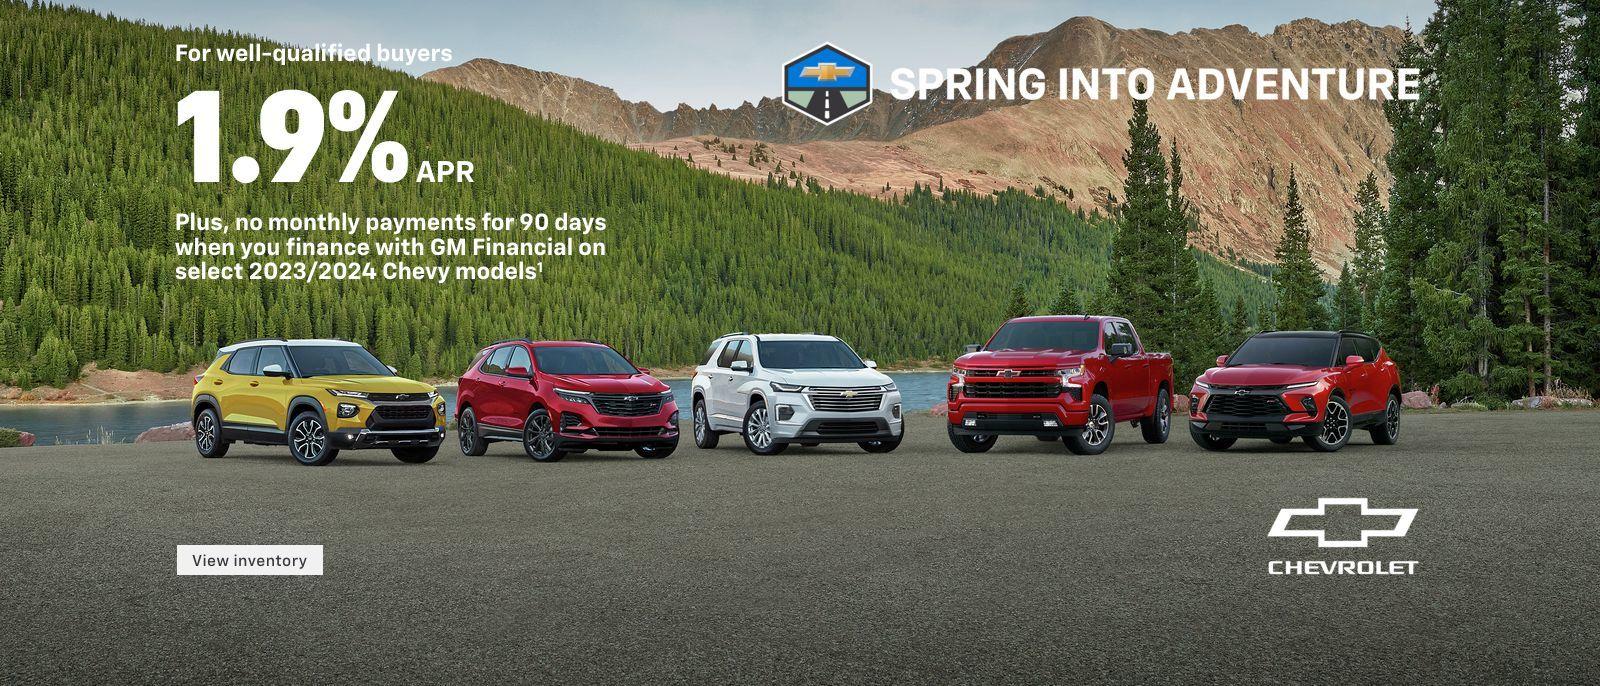 Spring into Adventure. For well-qualified buyers 1.9% APR + No monthly payments for 90 days when you finance with GM Financial on select 2023/2024 Chevy models.